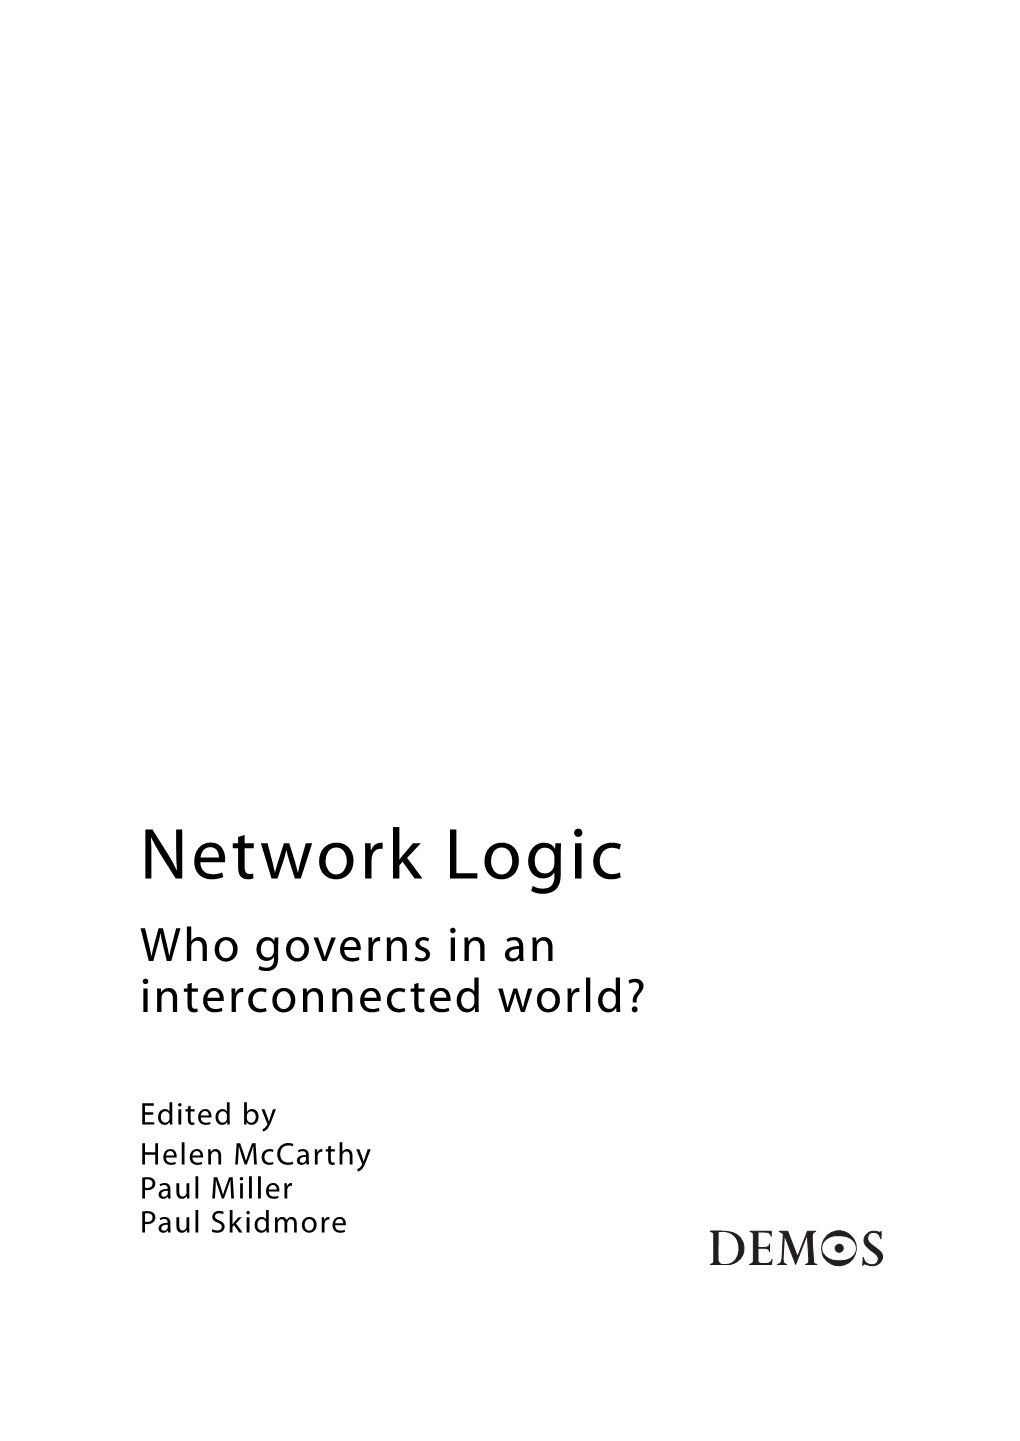 Network Logic Who Governs in an Interconnected World?